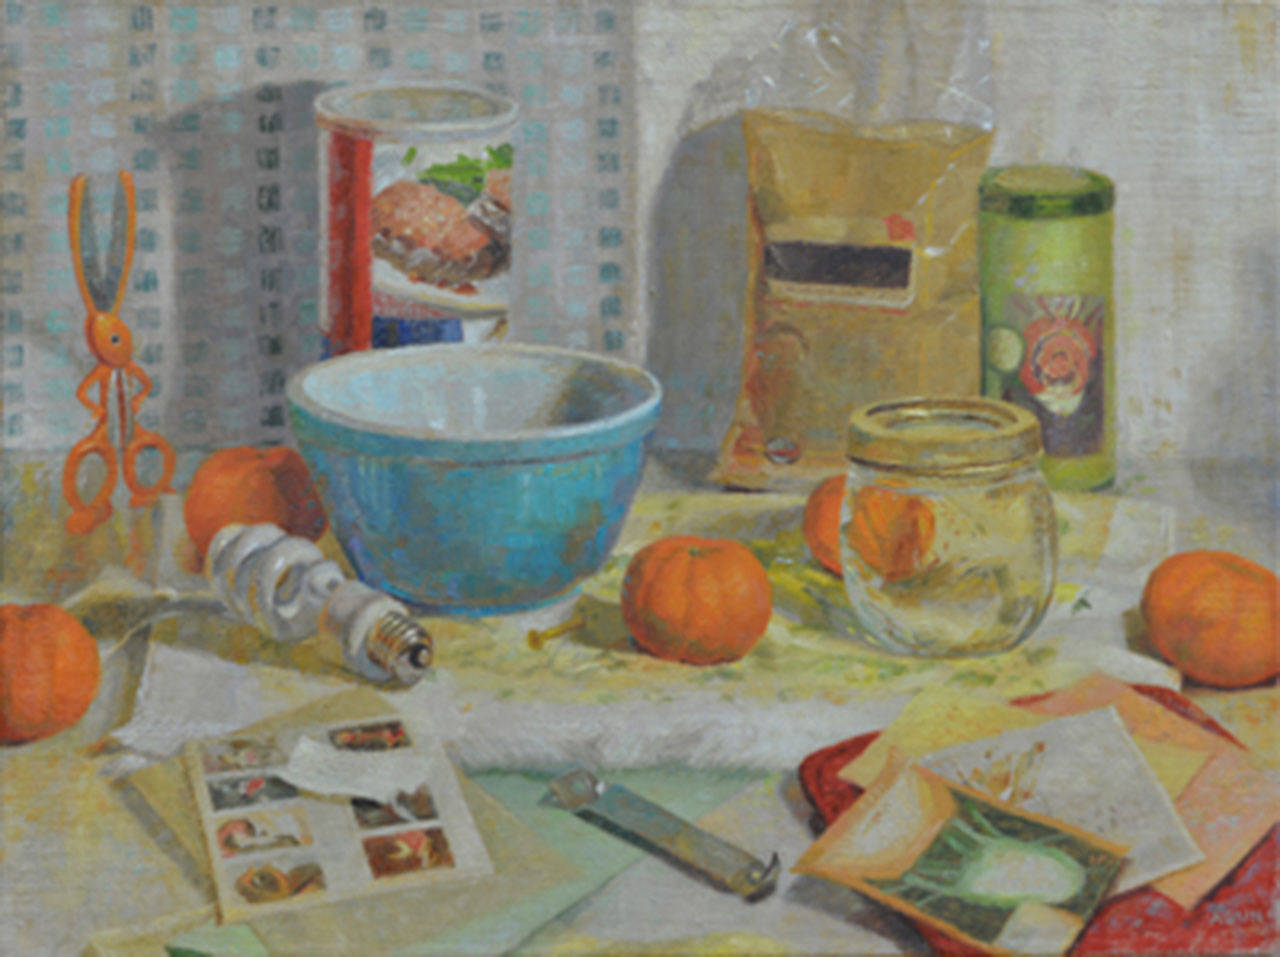 This painting by Brandy Agun is called “Blue Bowl with Tangerines.” Agun’s work will be on display and for sale this weekend at Susan Spar’s studio this weekend. (Susan Spar)